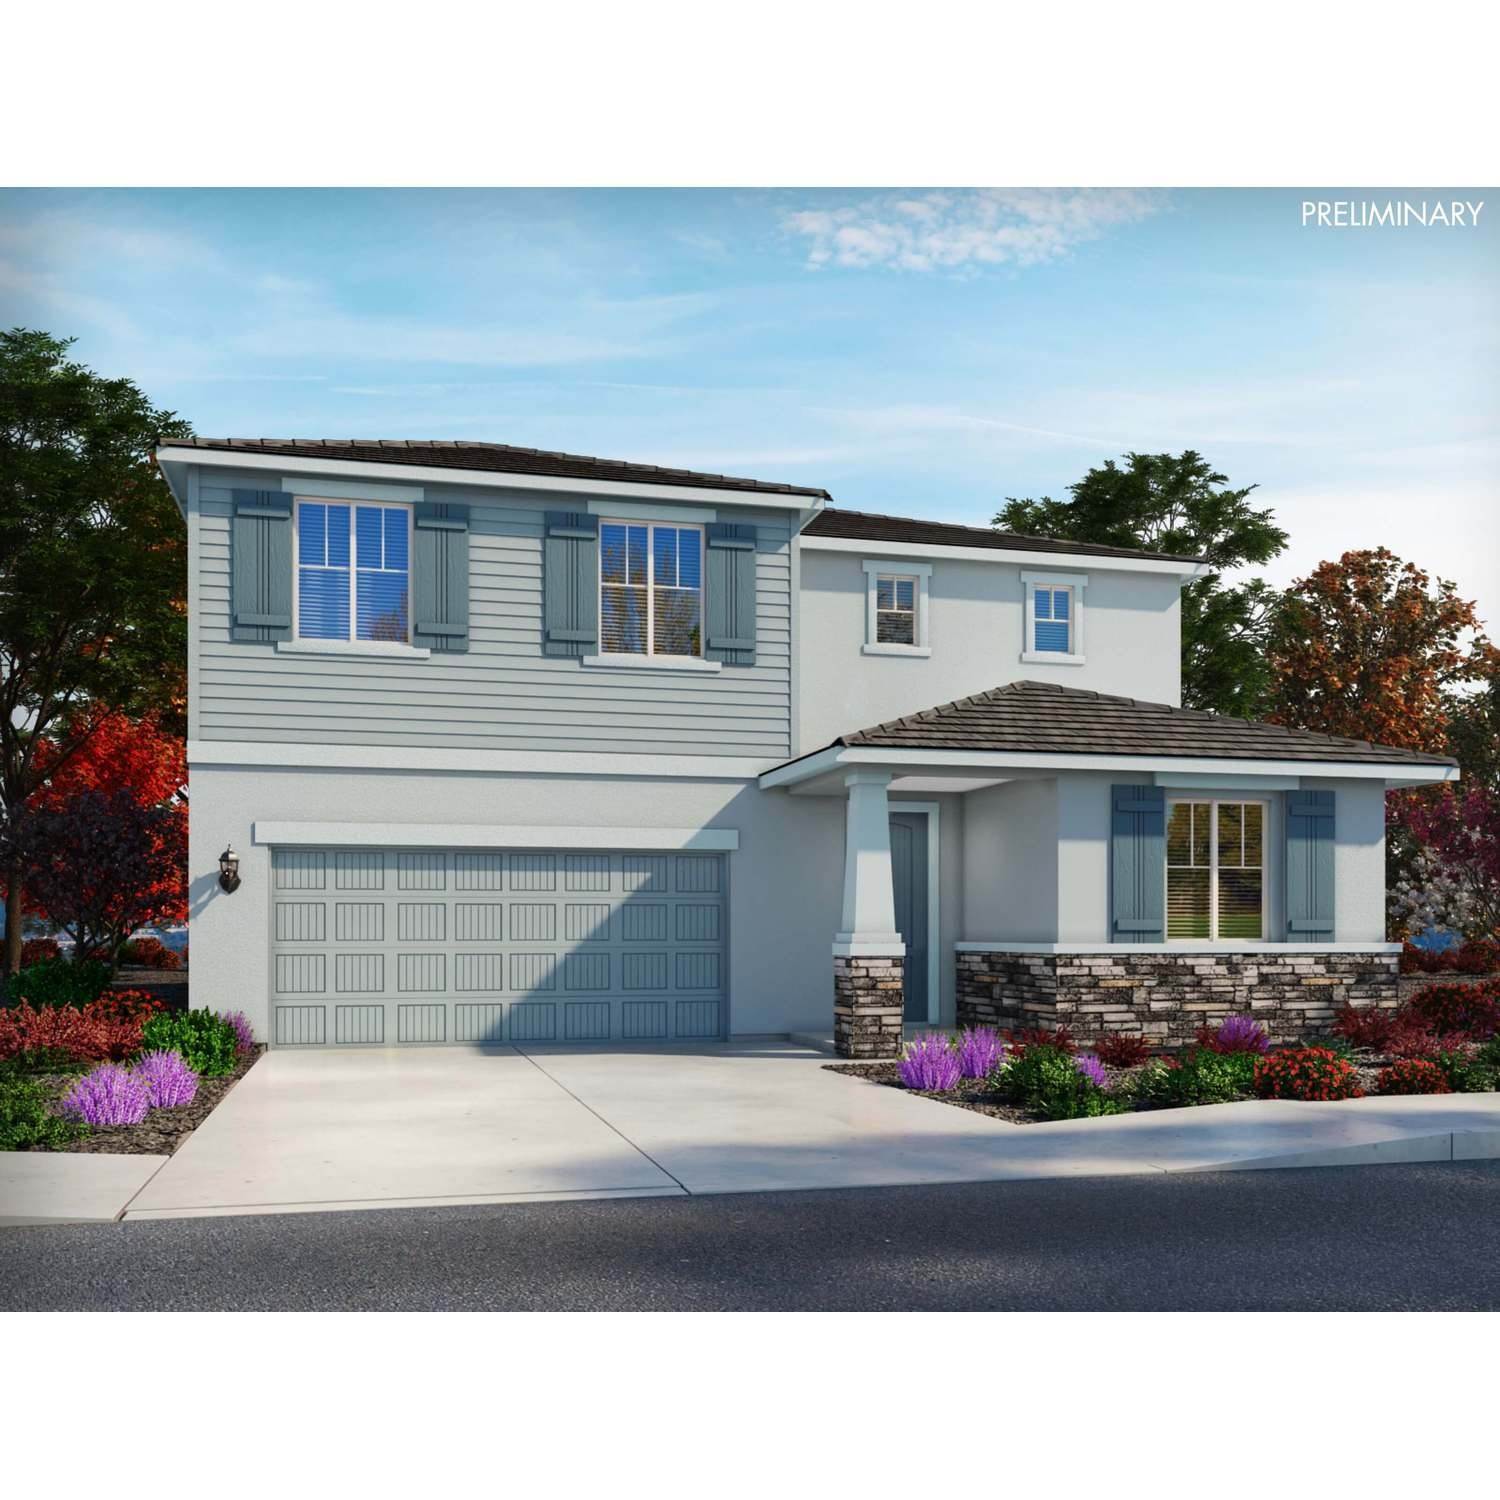 Single Family for Sale at Elk Grove, CA 95757